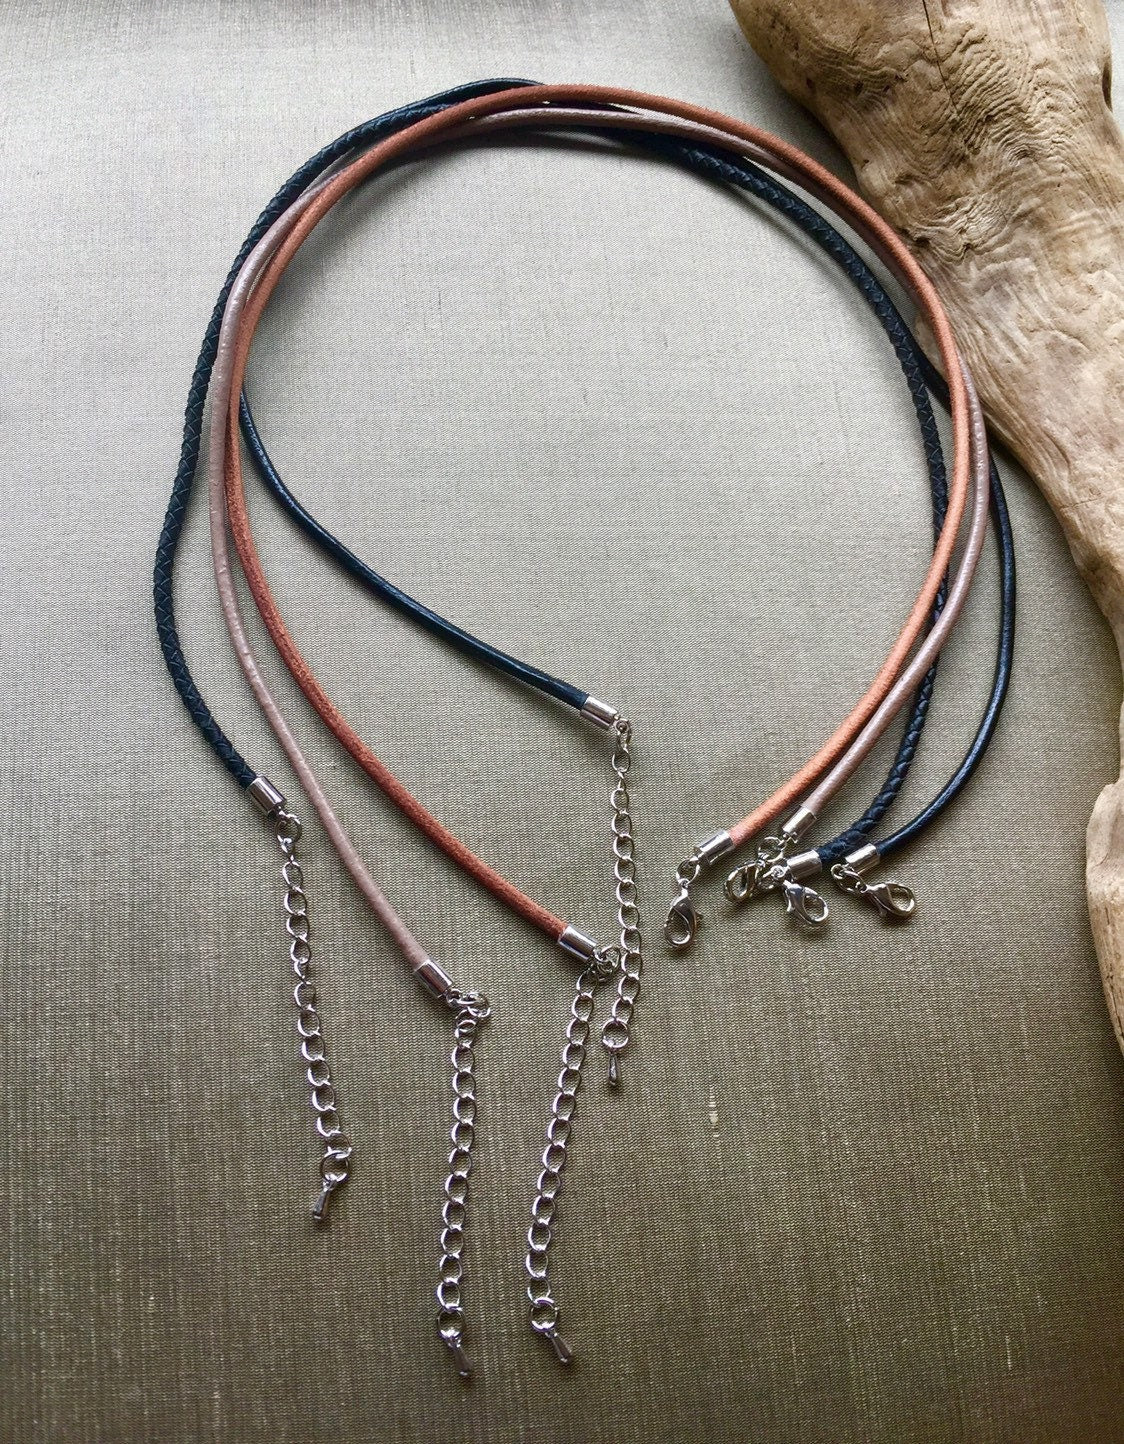 Genuine Black Leather Cord Necklace 2mm or 3mm 3mm / 19 inch